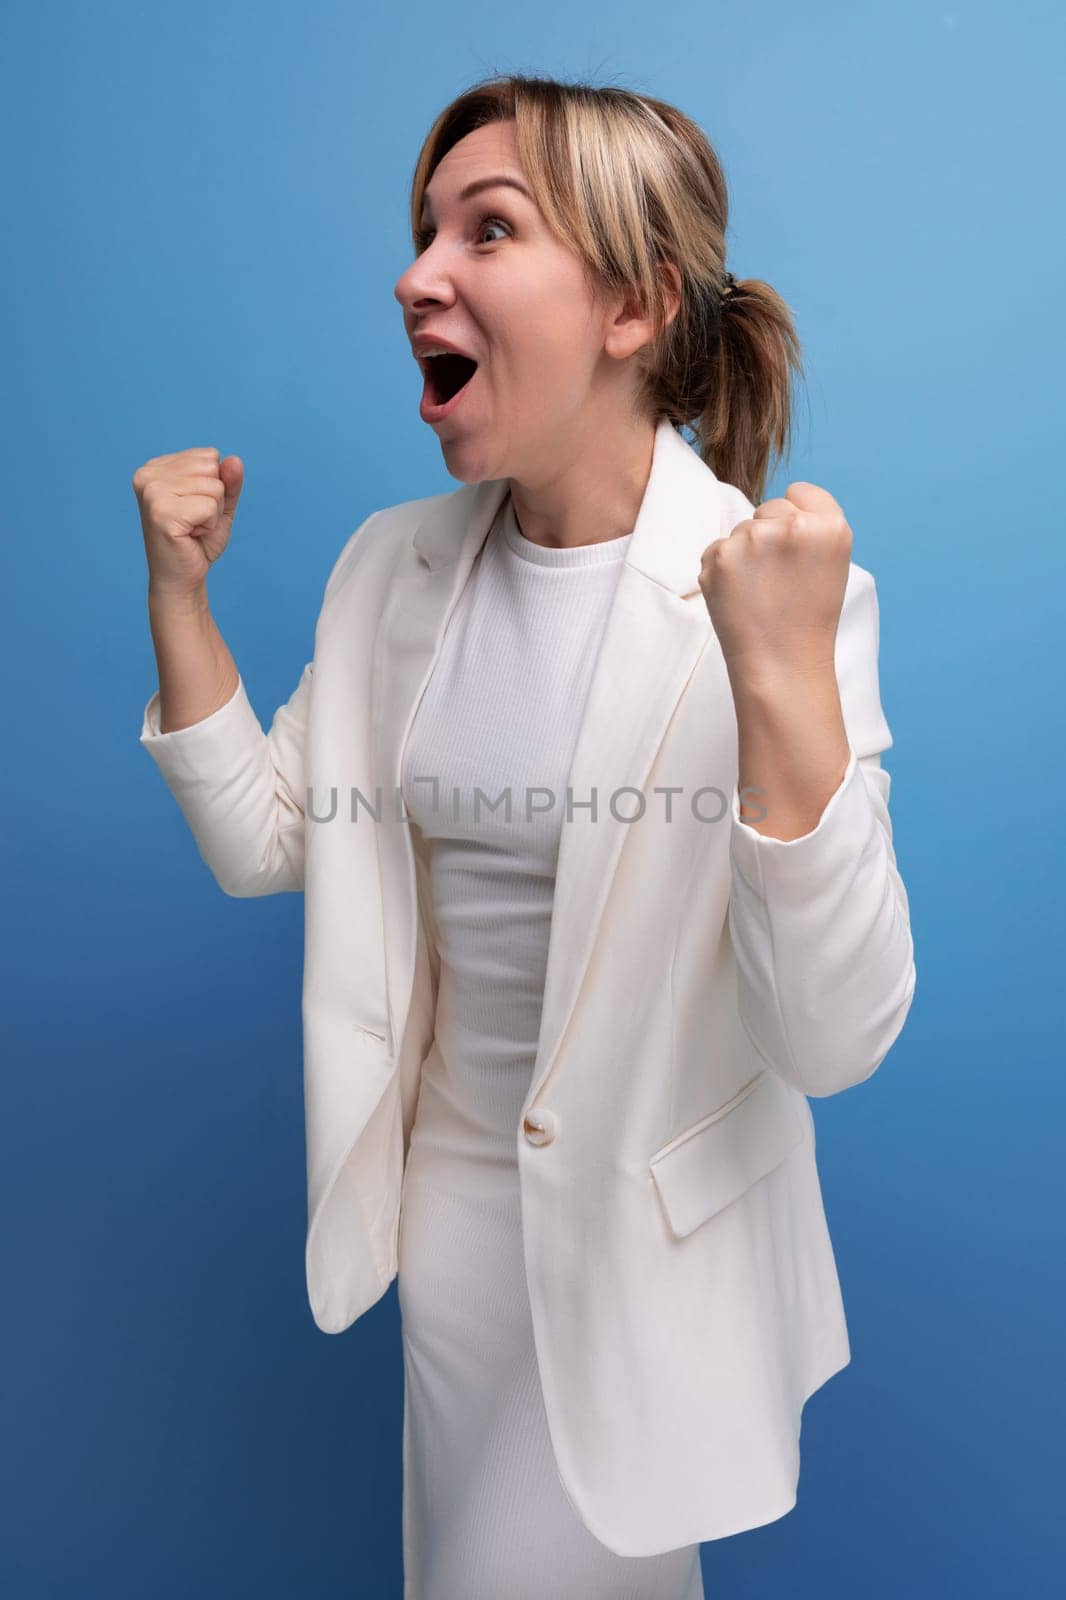 joyful happy young european woman dressed in white jacket and dress.